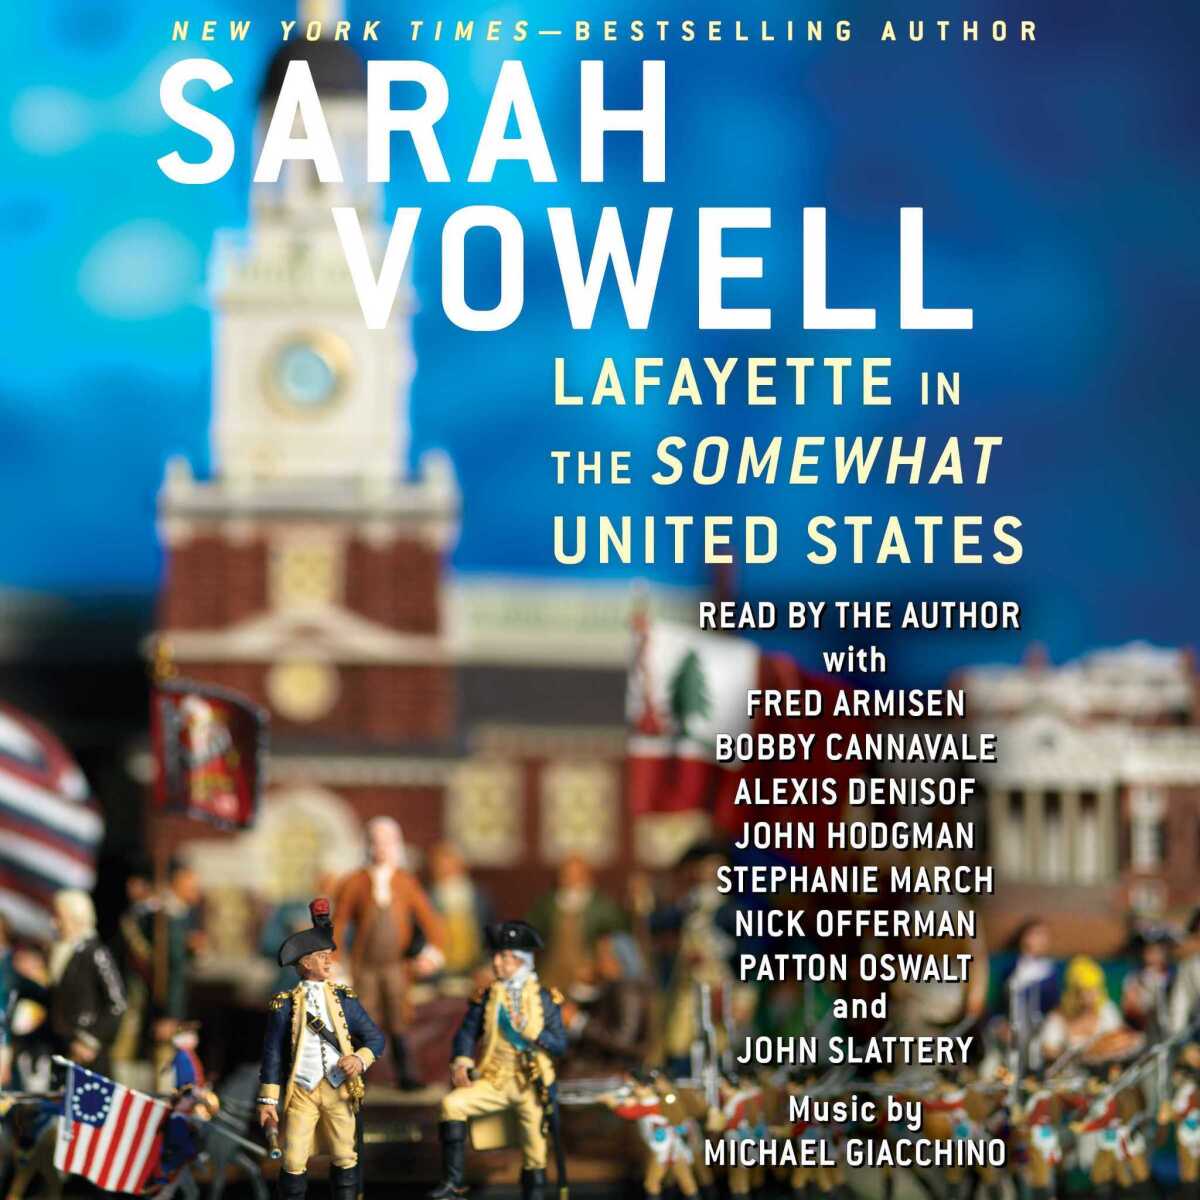 "Lafayette in the Somewhat United States" by Sarah Vowell